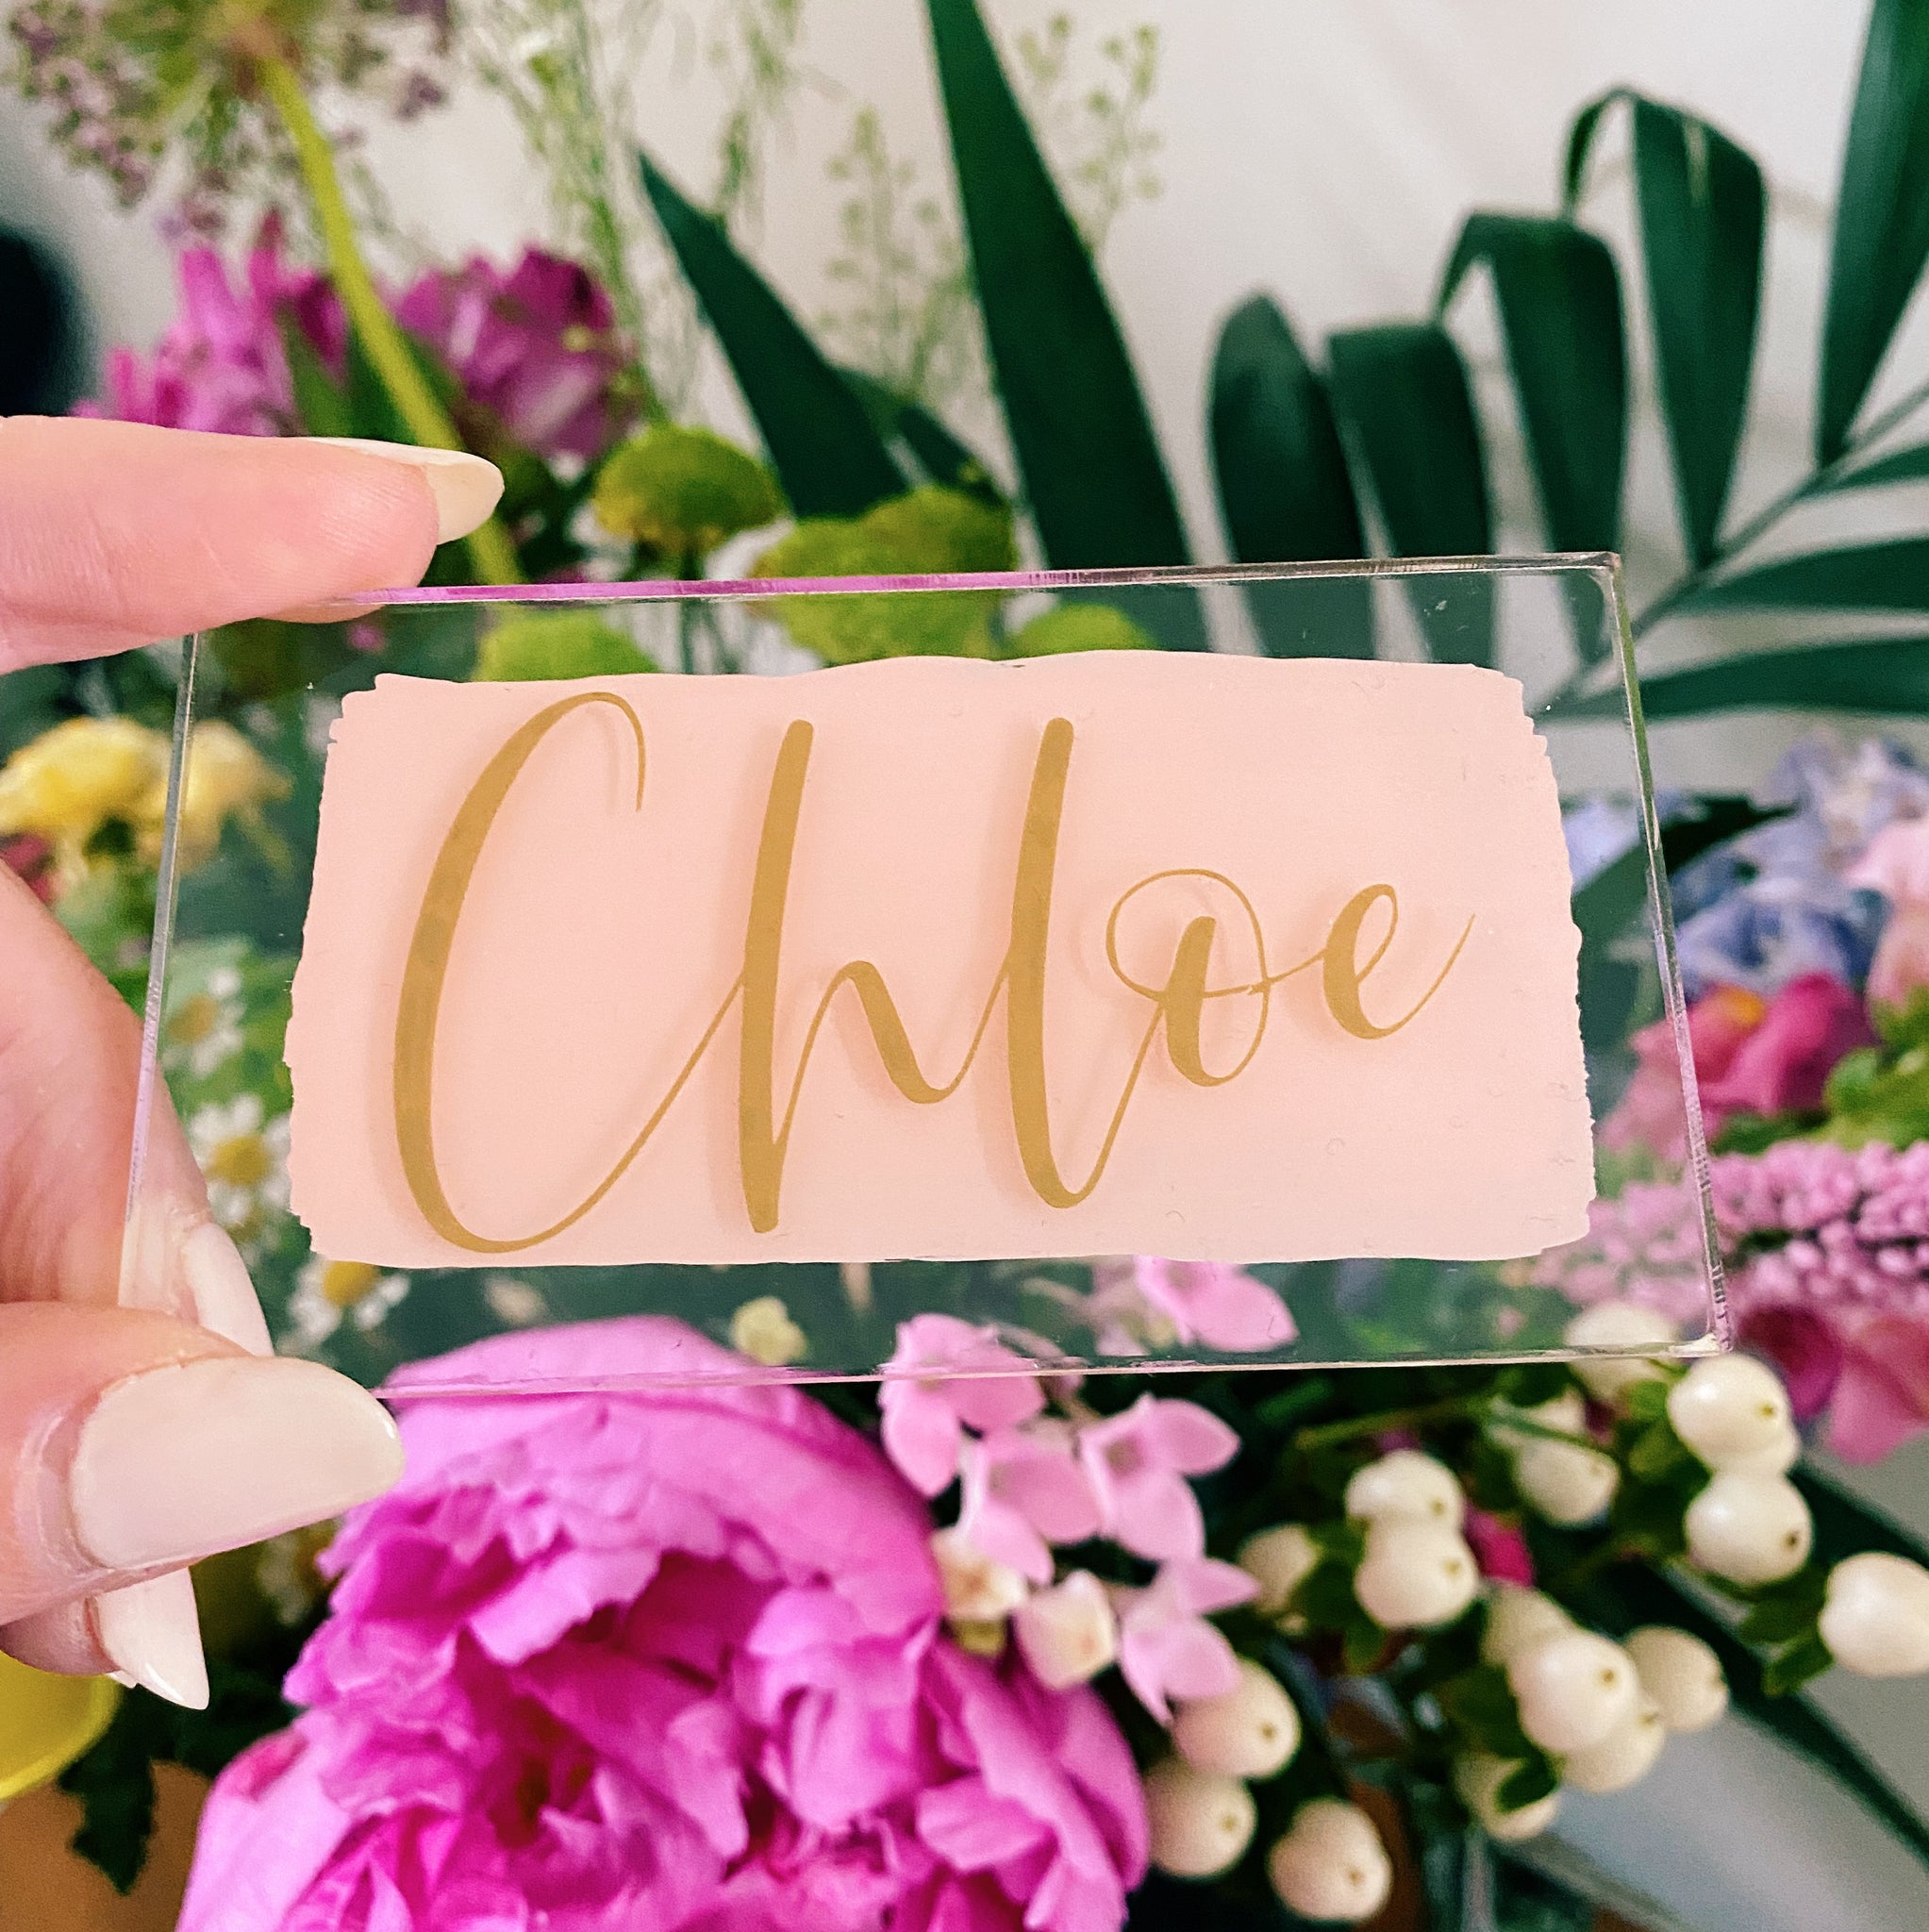 Acrylic place setting - blush pink background with gold lettering